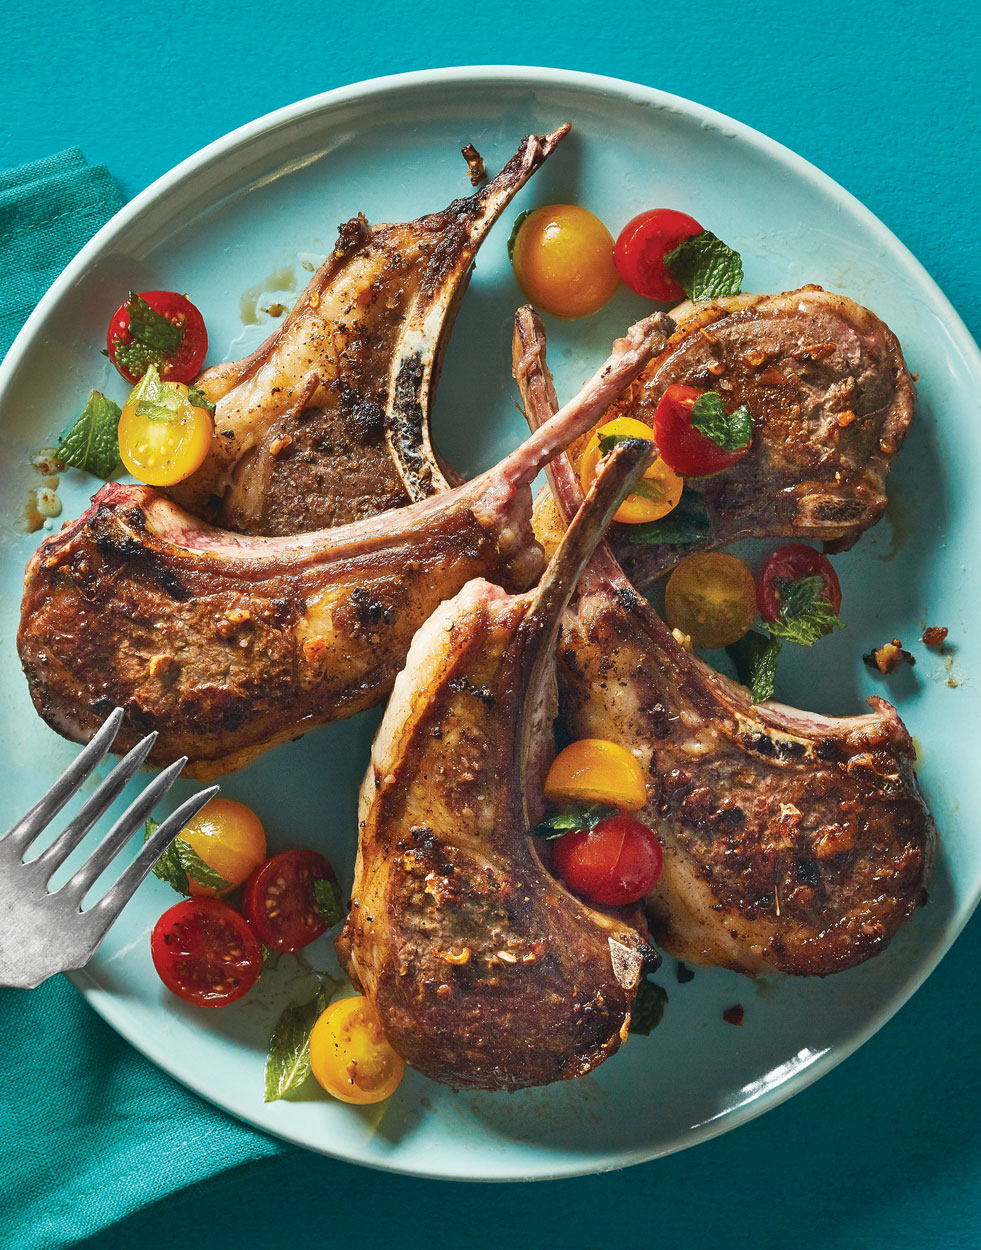 Seared Lamb Chops with tomato & mint slaw